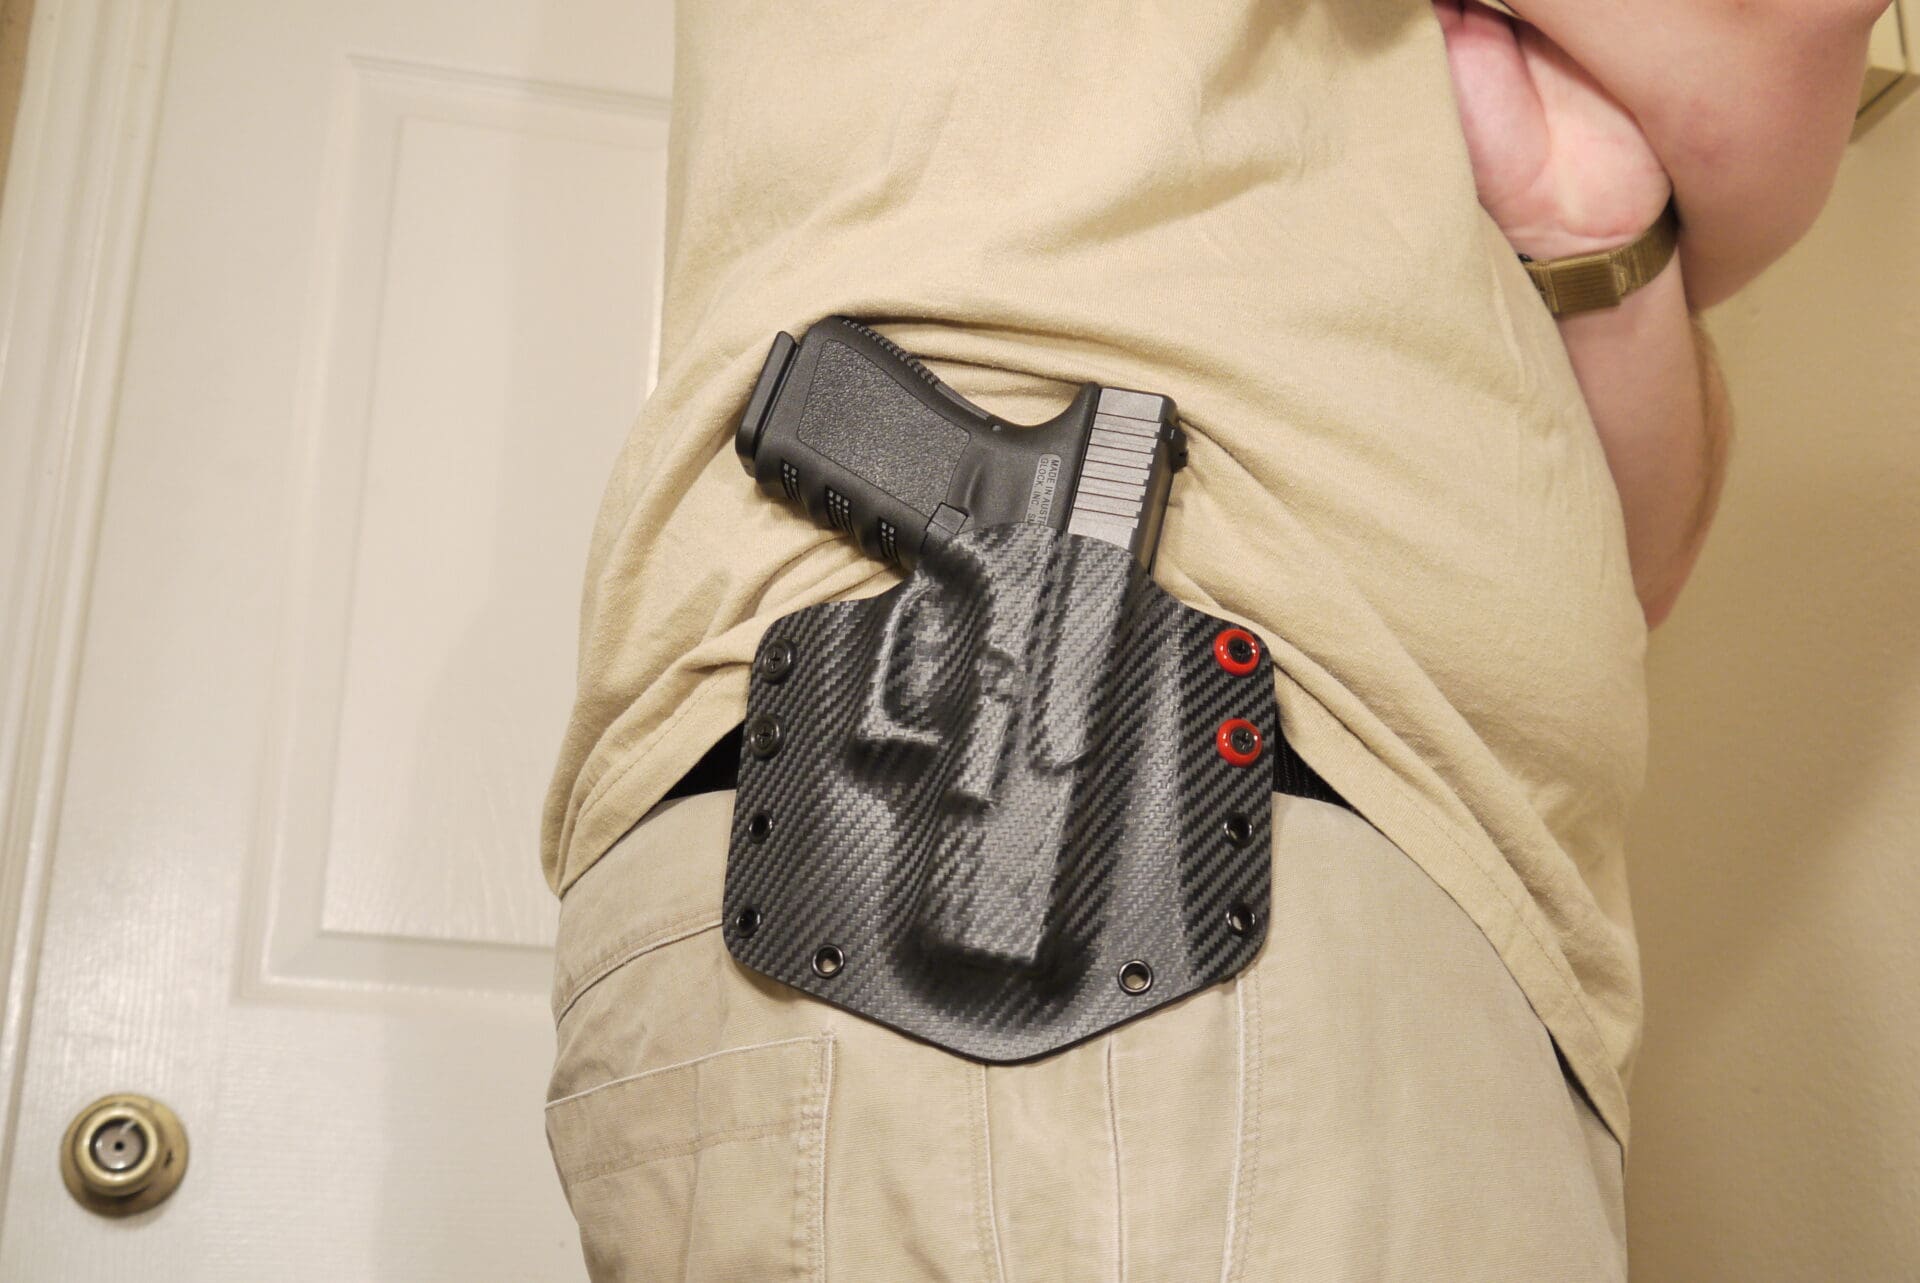 Gear Review: MEK OWB Patterned Kydex Pancake Holster - The Truth About Guns